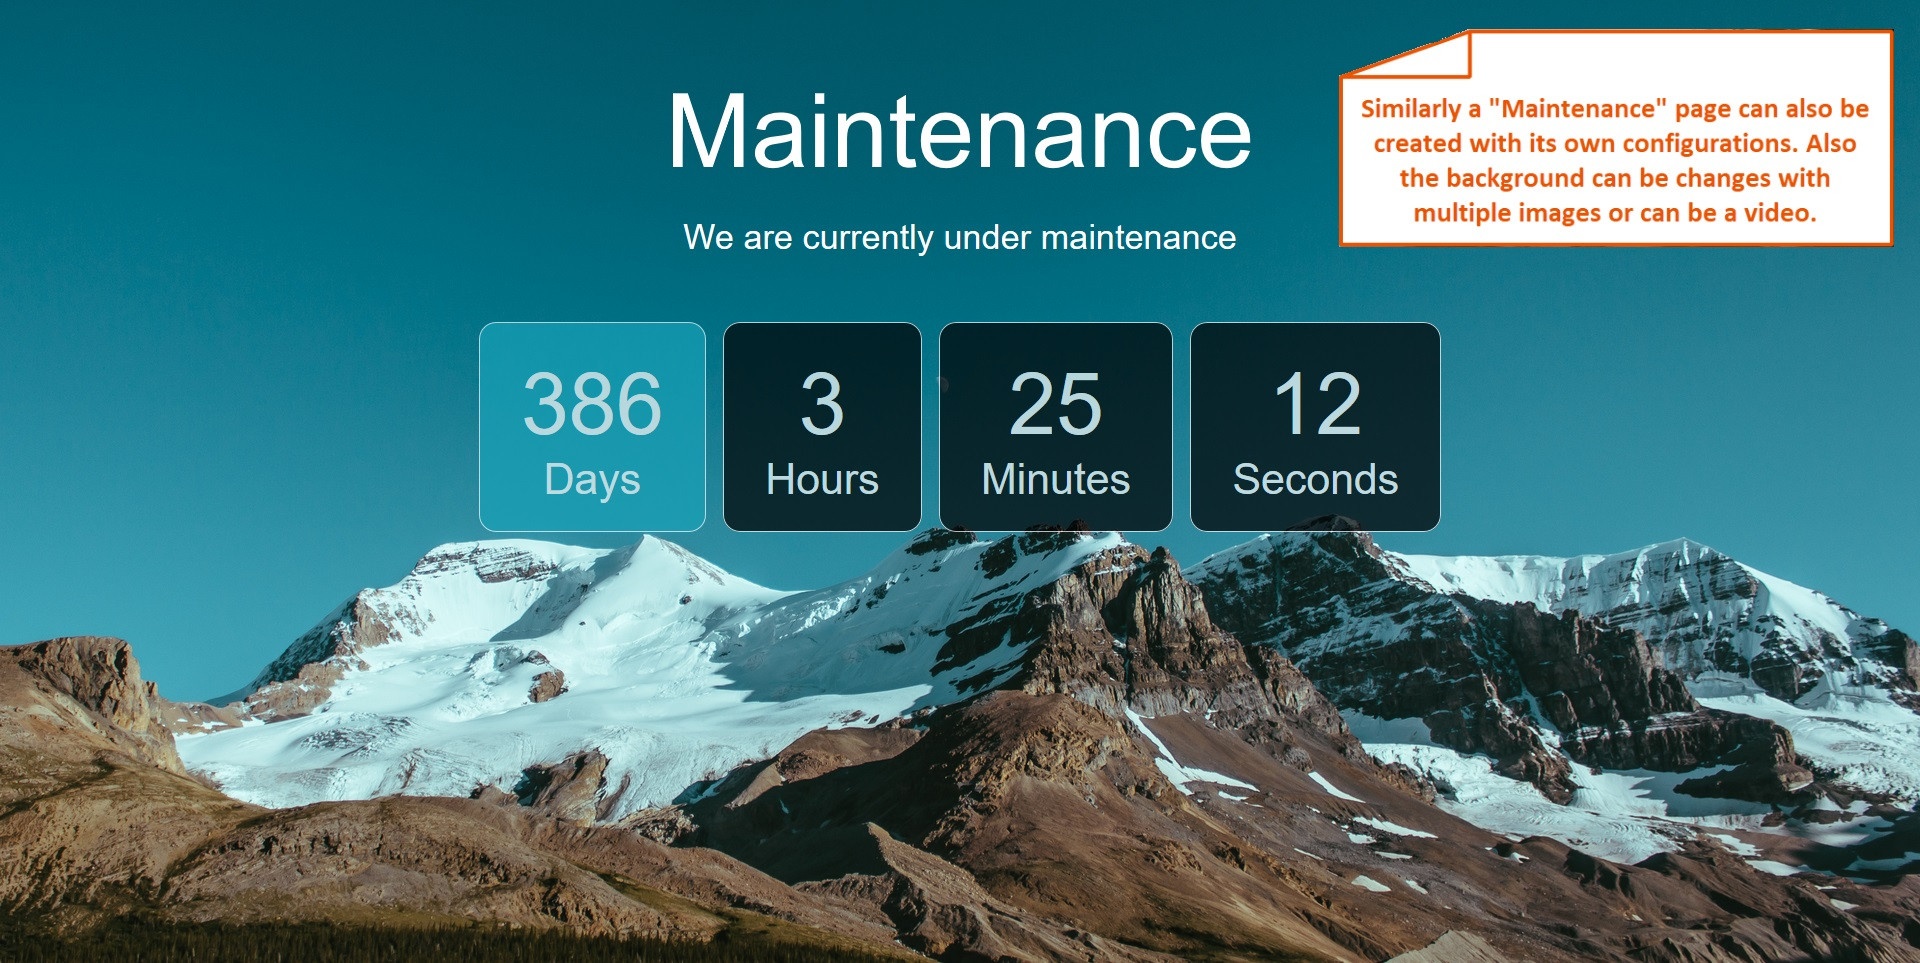 Henry Roger Magento News: COMING SOON / MAINTENANCE MODE for Magento 2